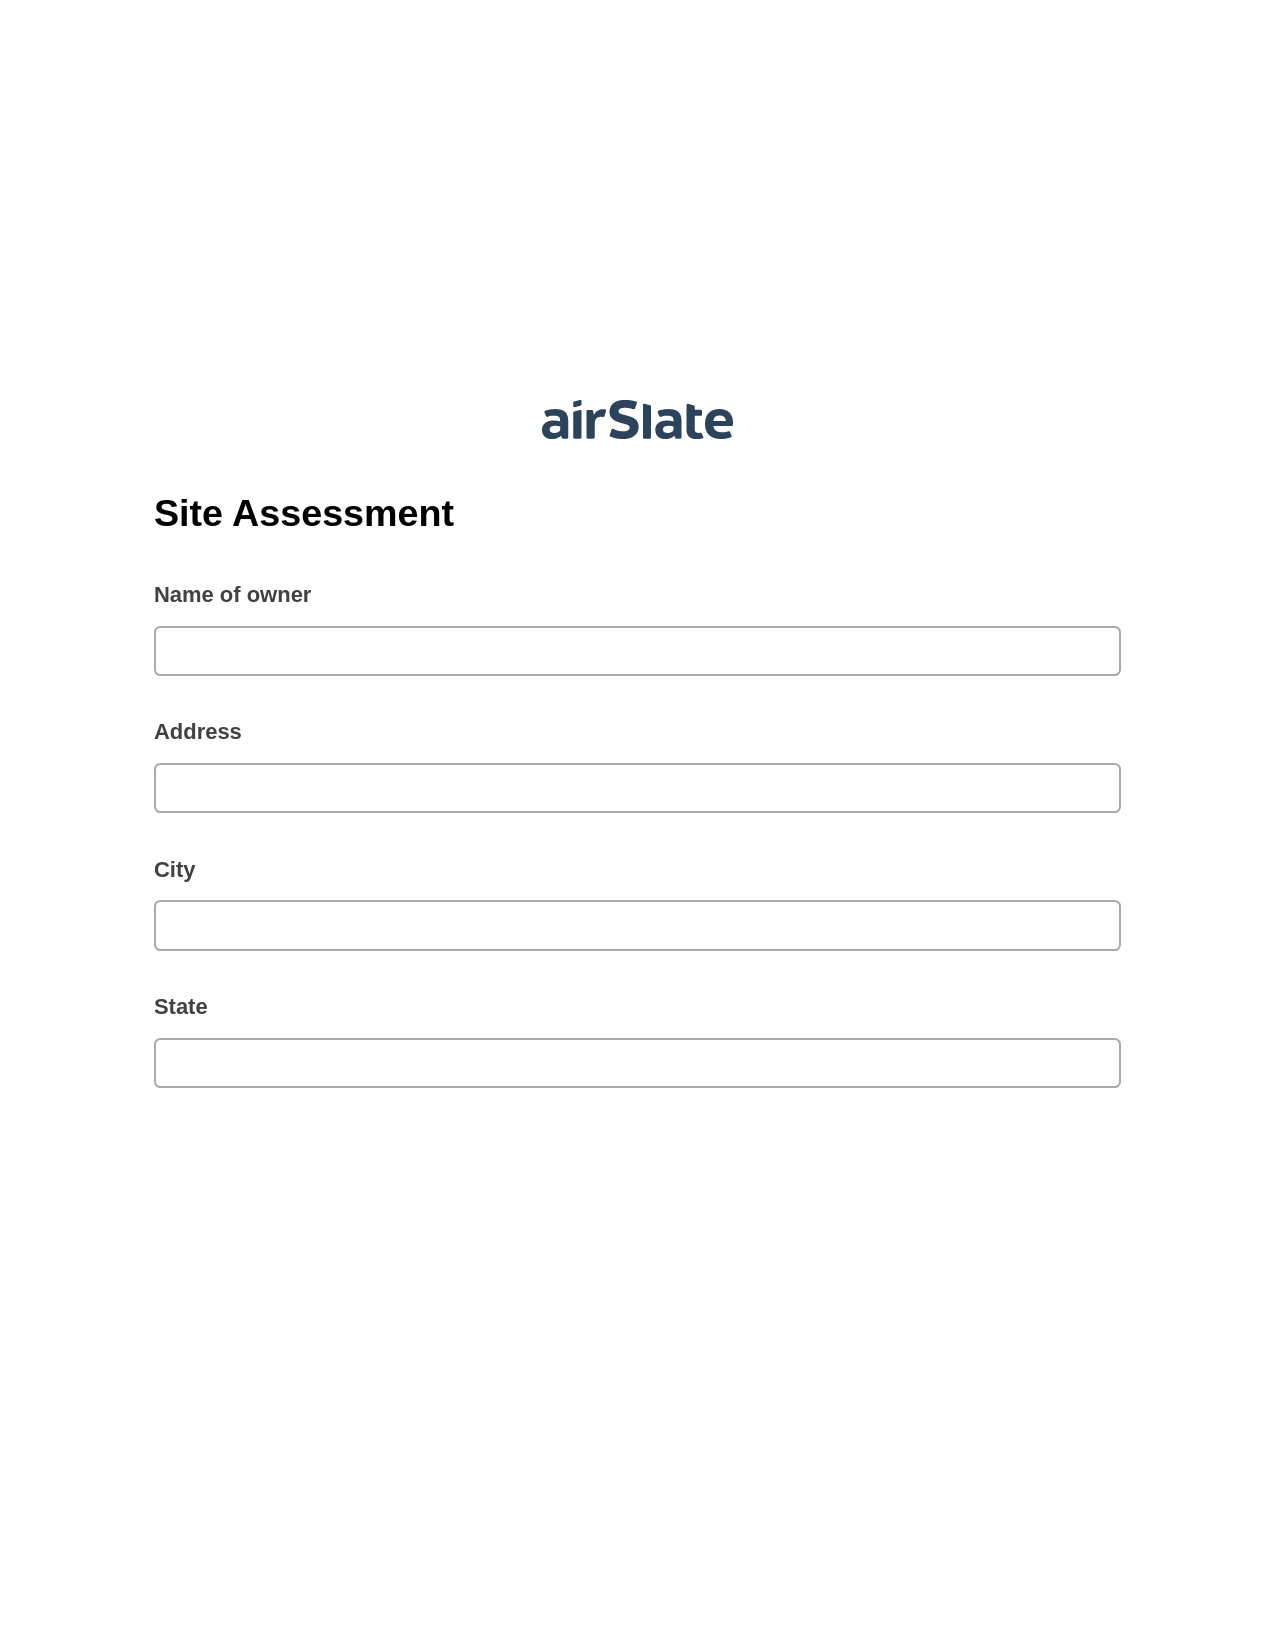 Multirole Site Assessment Pre-fill from CSV File Bot, Send a Slate with Roles Bot, Email Notification Postfinish Bot